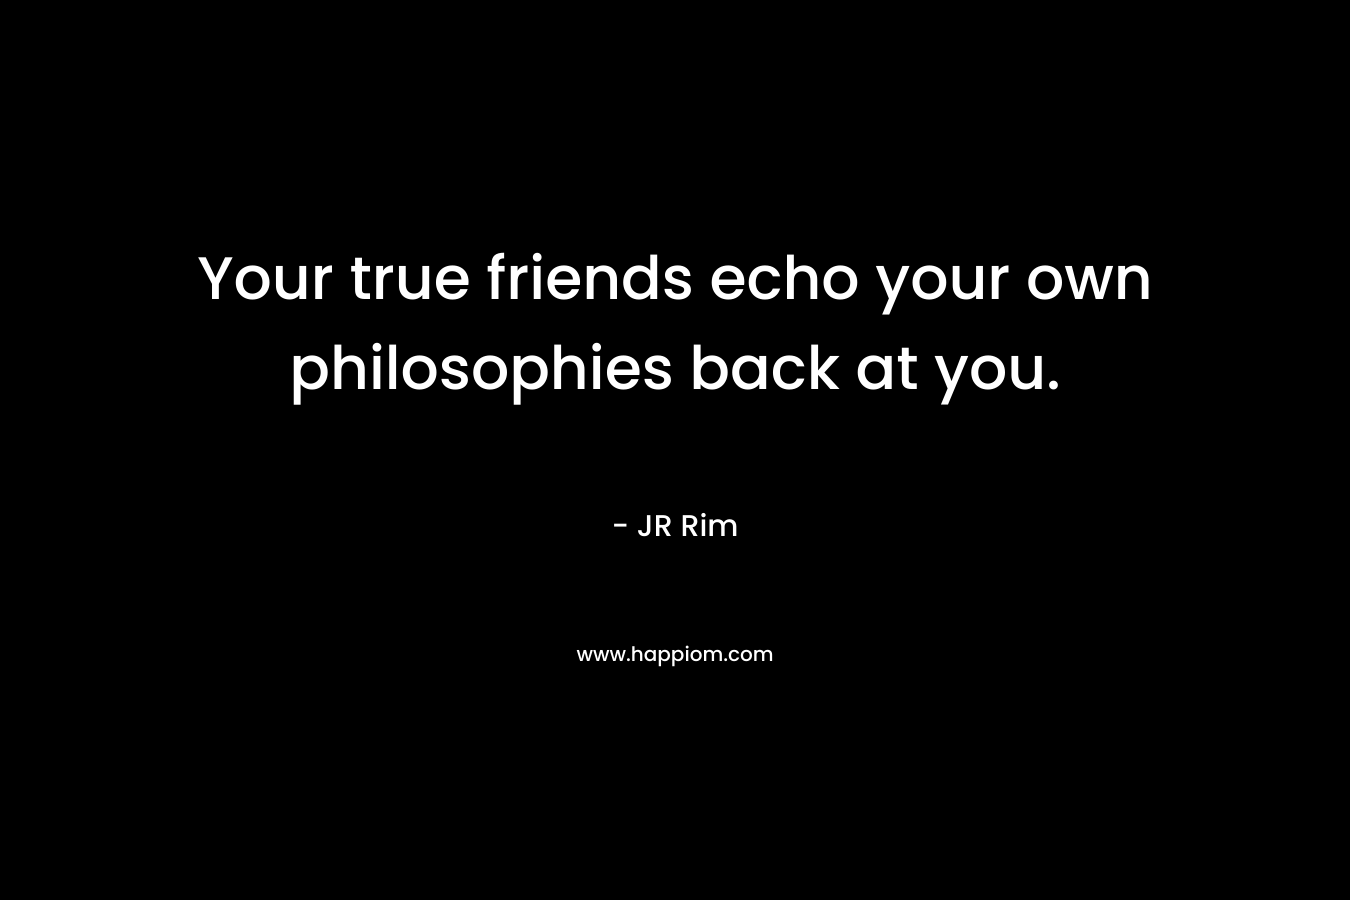 Your true friends echo your own philosophies back at you.